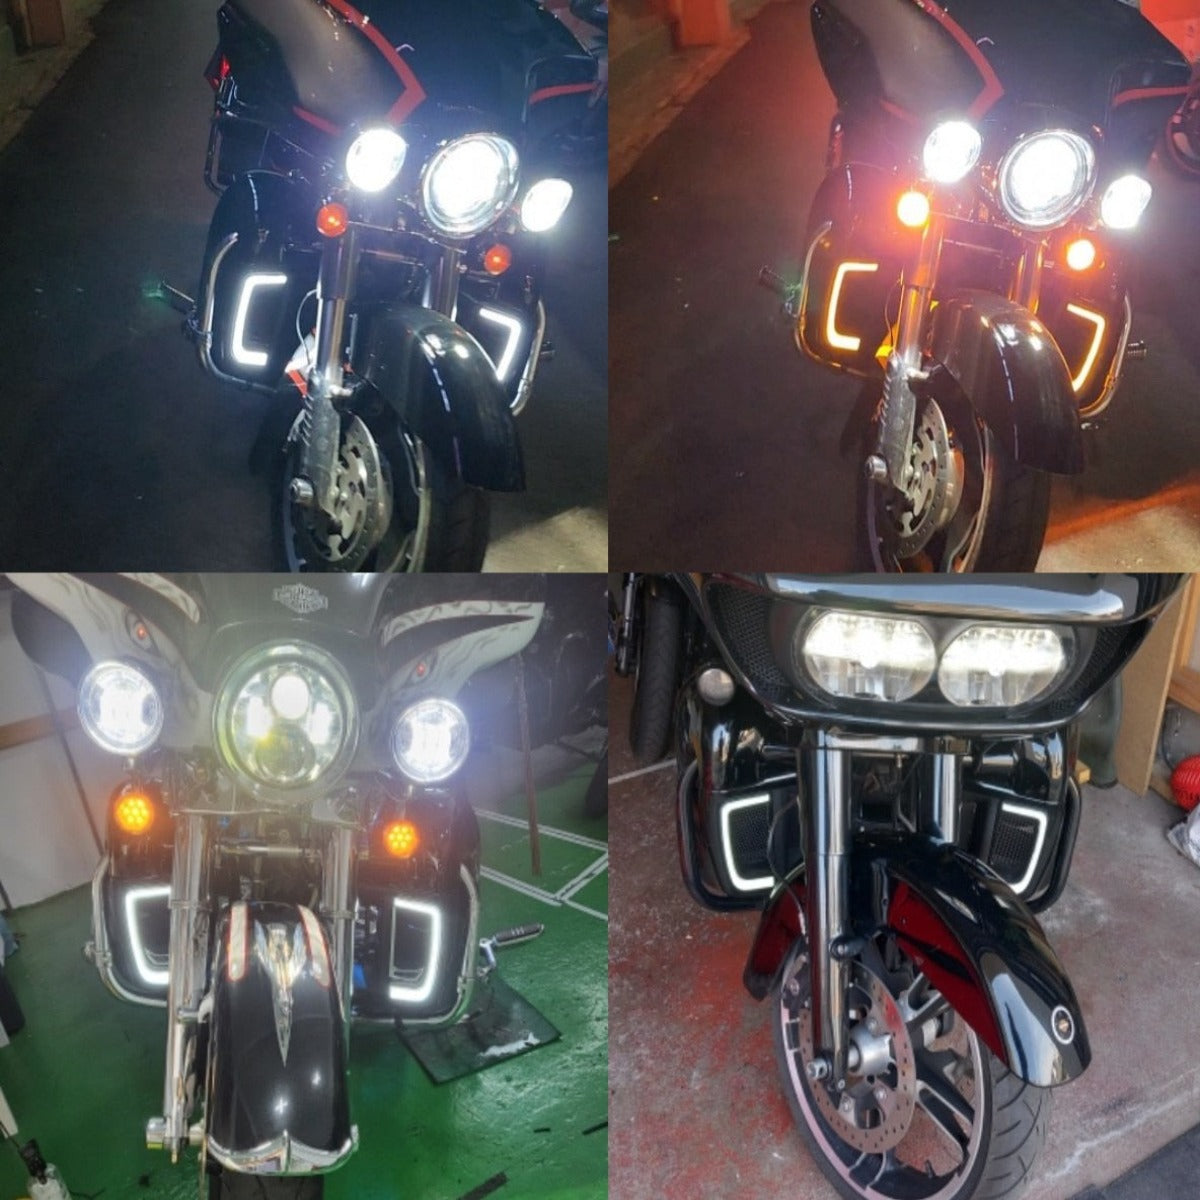 The Harley-Davidson Motorcycle LED Turn Signal Light Fairing Lower Grills, known for their iconic styling and powerful performance, are a popular choice among riders. Whether you're cruising on a Harley Touring bike or simply exploring the open road.